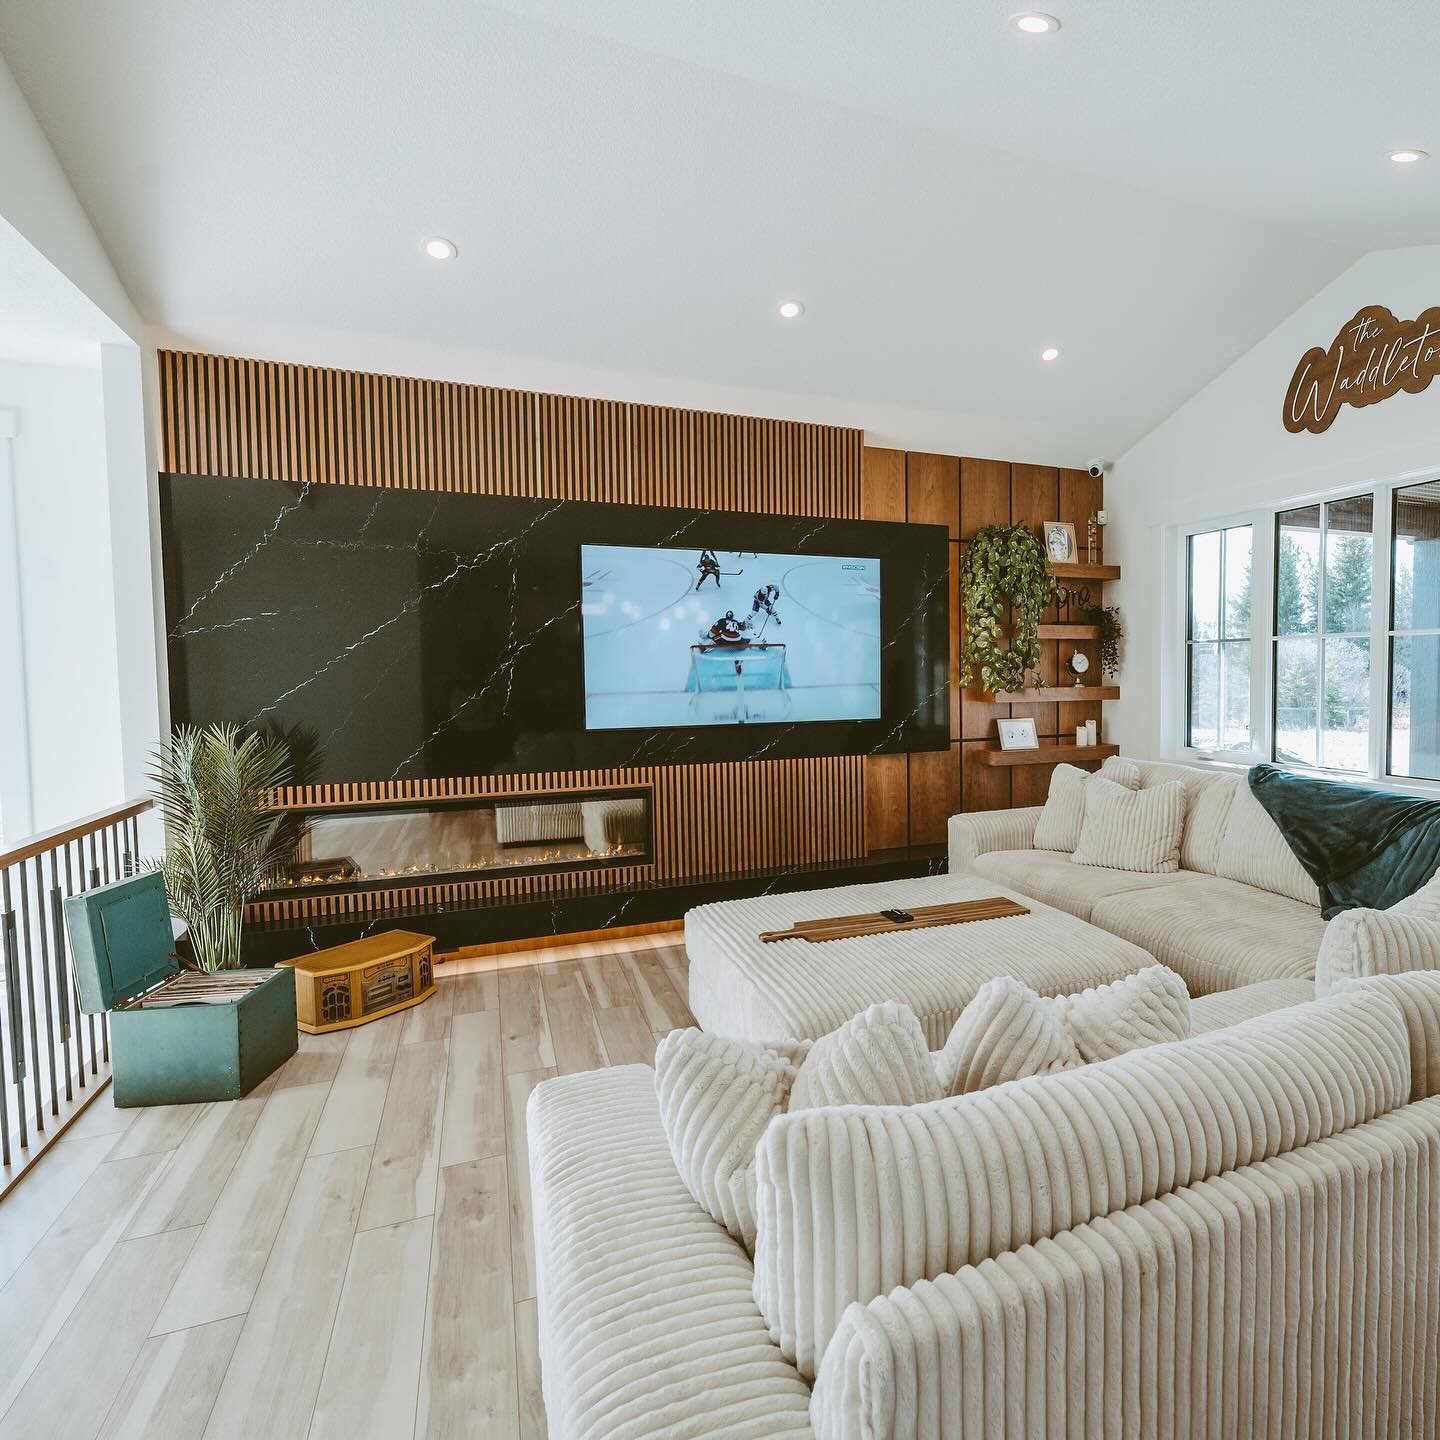 What a statement! 😍 Our clients came to us with a vision of a wooden feature wall with this wicked marble slab to anchor the tv. We couldn&rsquo;t be happier with how this turned out!

Would you do something like this in your home? 
&bull;
&bull;
&b